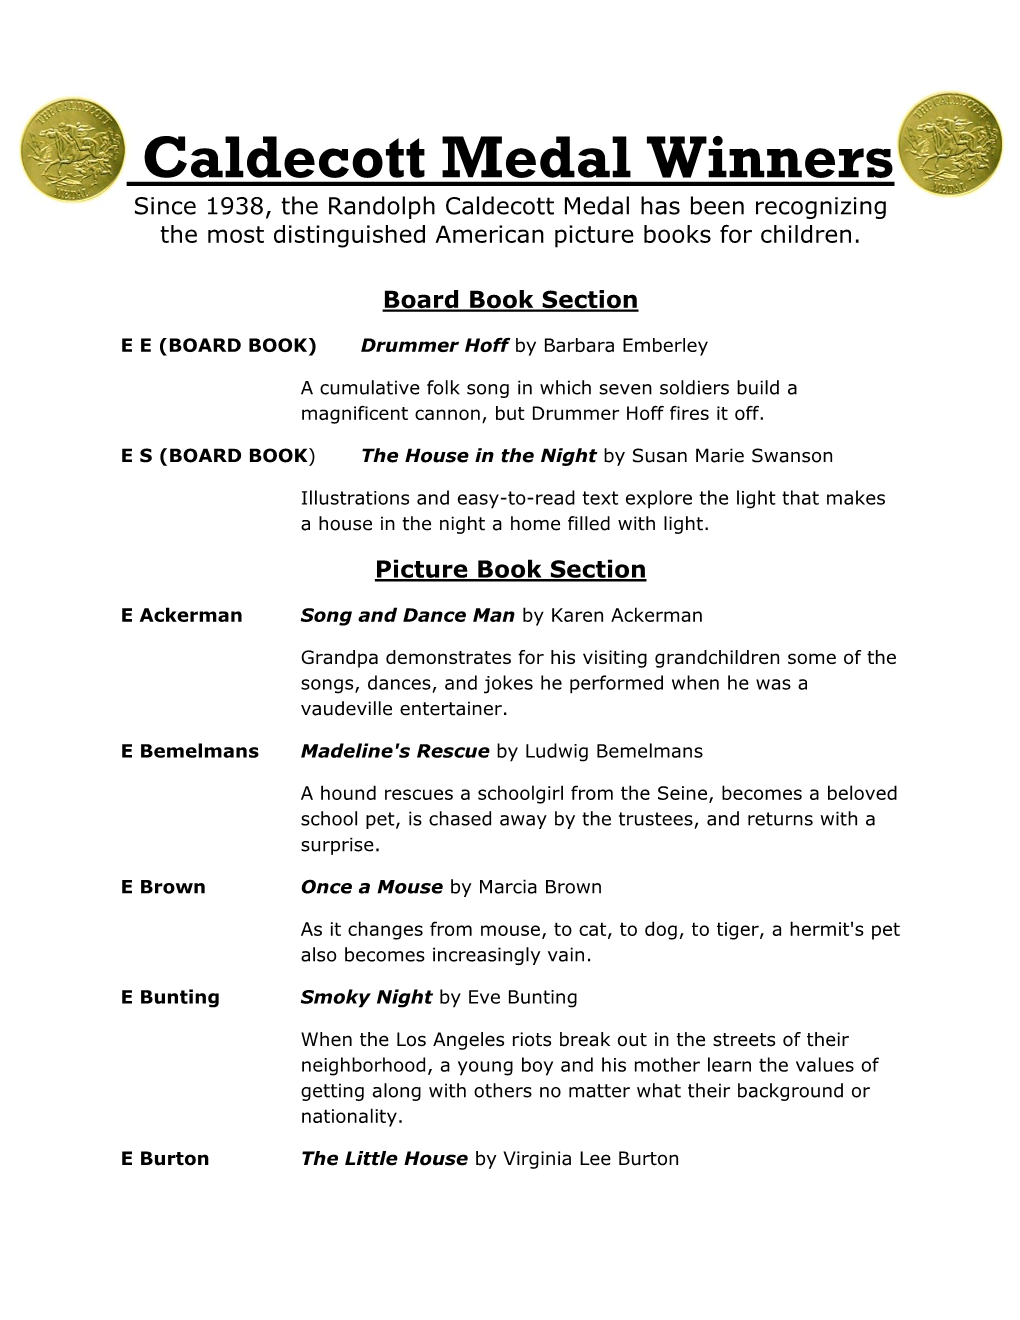 Caldecott Medal Winners Since 1938, the Randolph Caldecott Medal Has Been Recognizing the Most Distinguished American Picture Books for Children